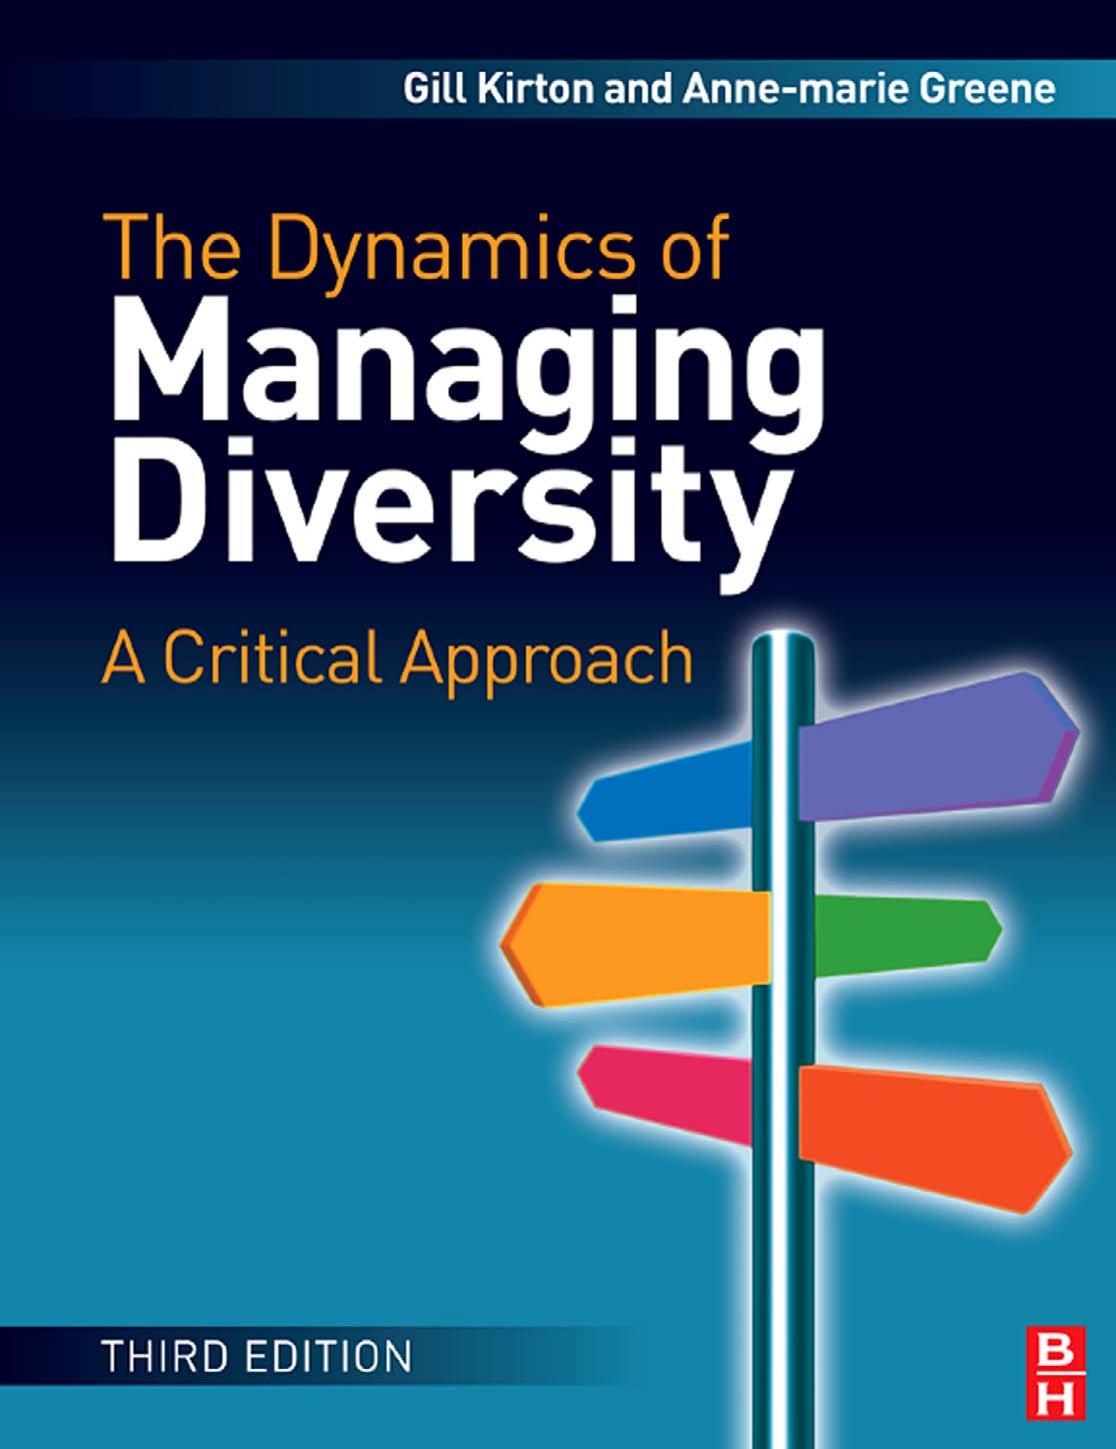 The Dynamics of Managing Diversity, Third Edition  A Critical Approach  2010